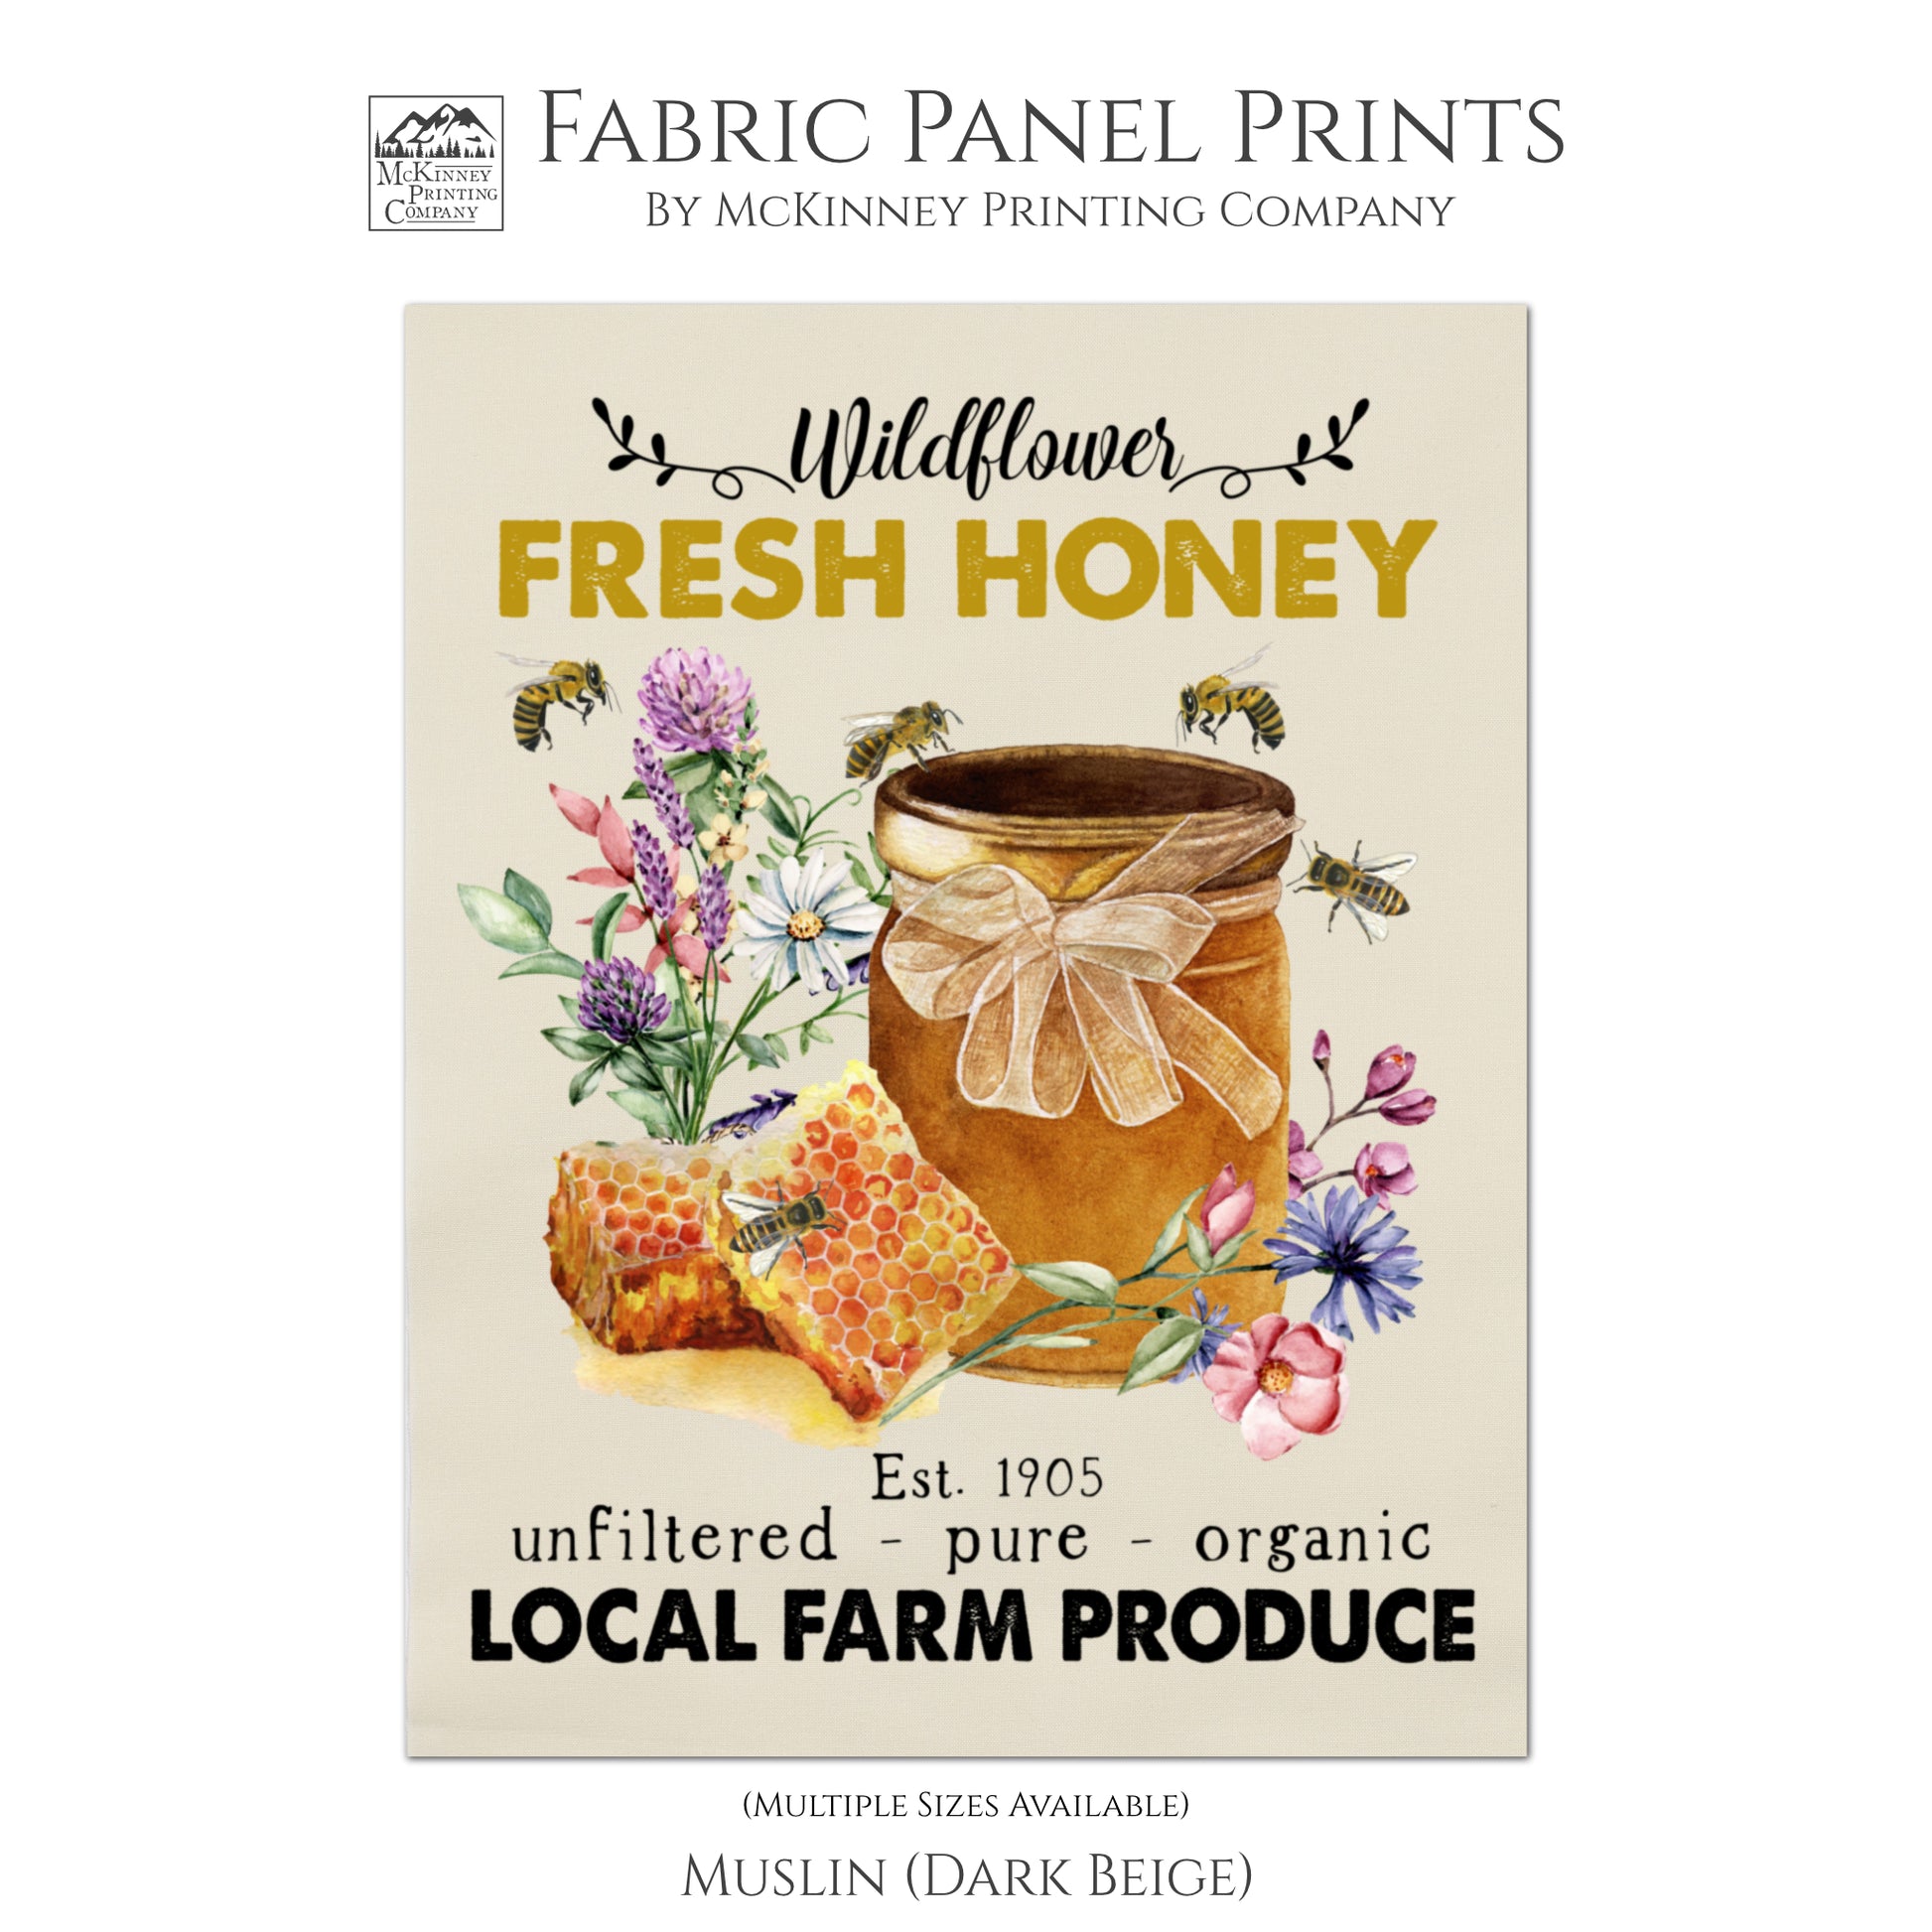 Honey Bee Fabric Panel, Farmers Market, Quilt Block, Fabric Panel Print, For Pillows, Towels, Wall Art, Sewing Crafts, Muslin